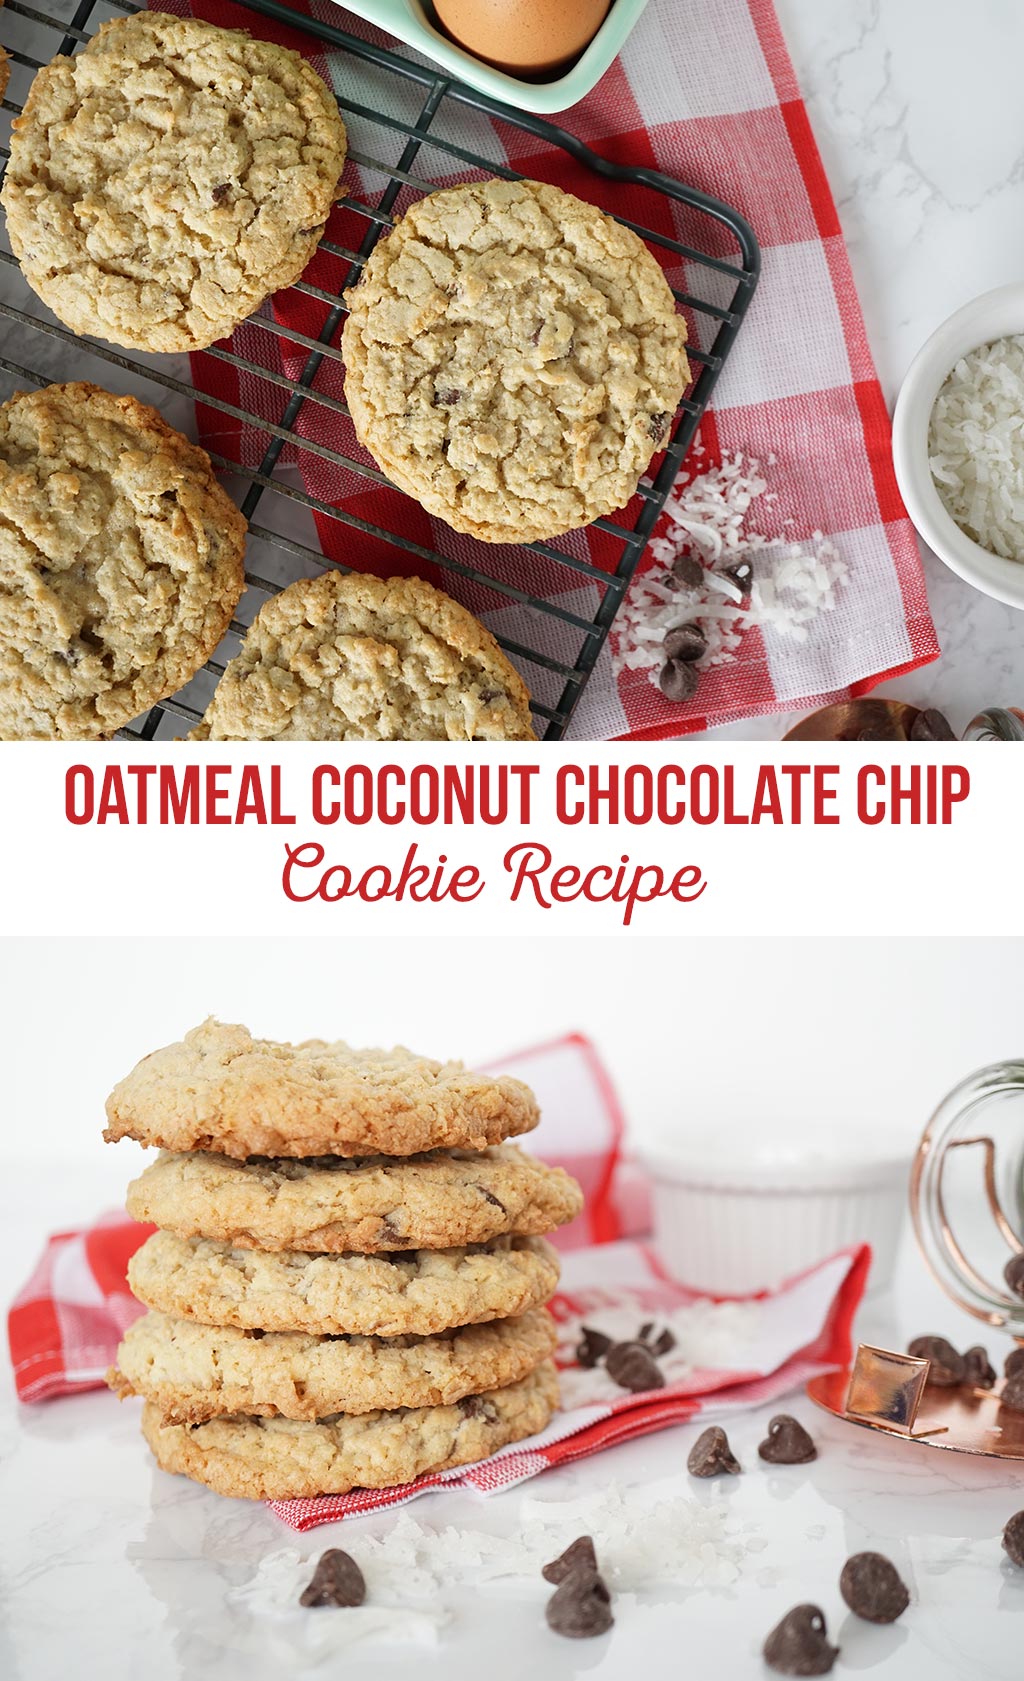 Oatmeal Coconut Chocolate Chip Cookie Recipe | If there ever was a perfect cookie recipe, this is it! Oatmeal Coconut Chocolate Chip Cookies are chewy and delicious! Scoop with a 3 tbsp scoop for large cookies.